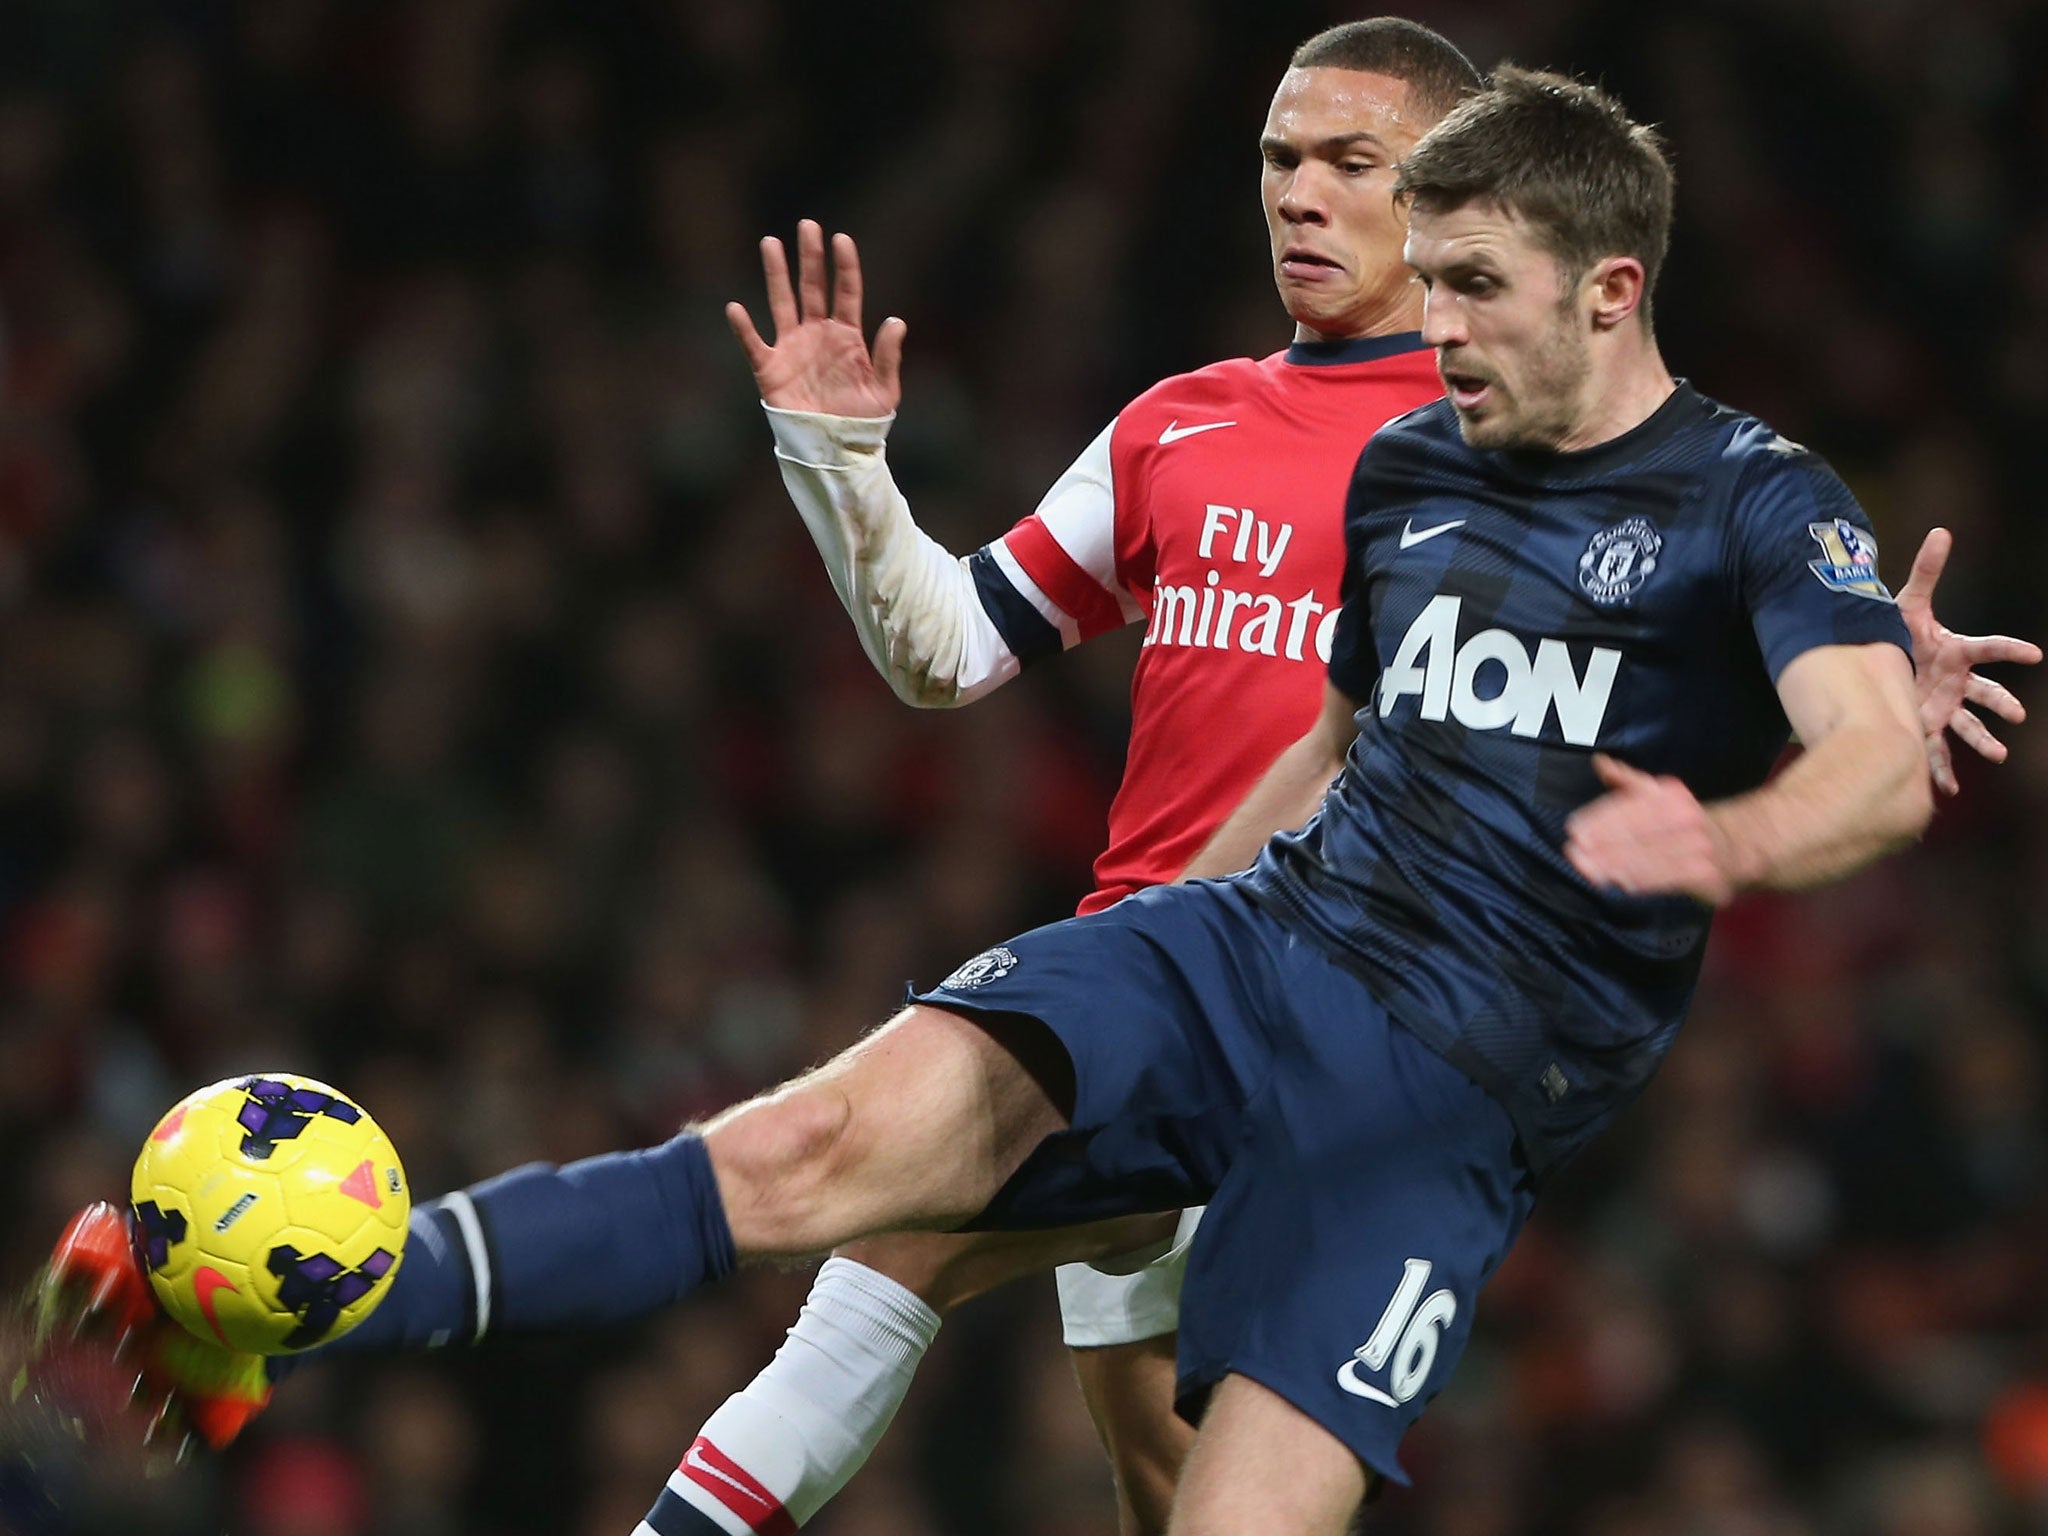 Michael Carrick wins the ball against Arsenal